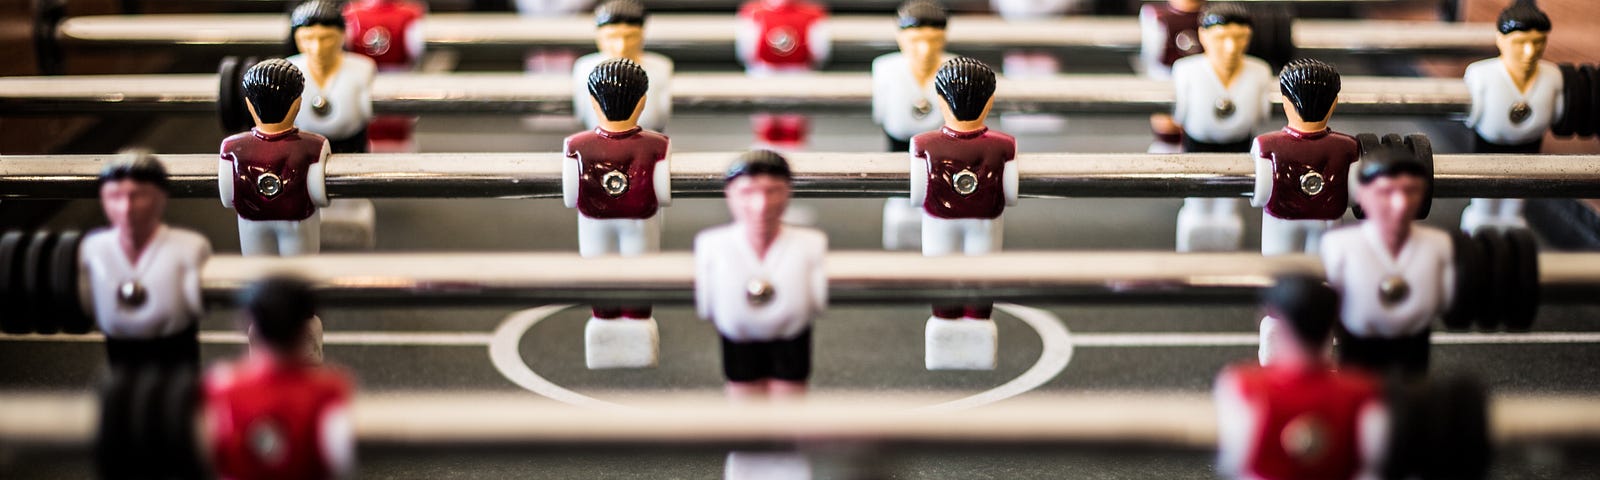 close up of foosball table